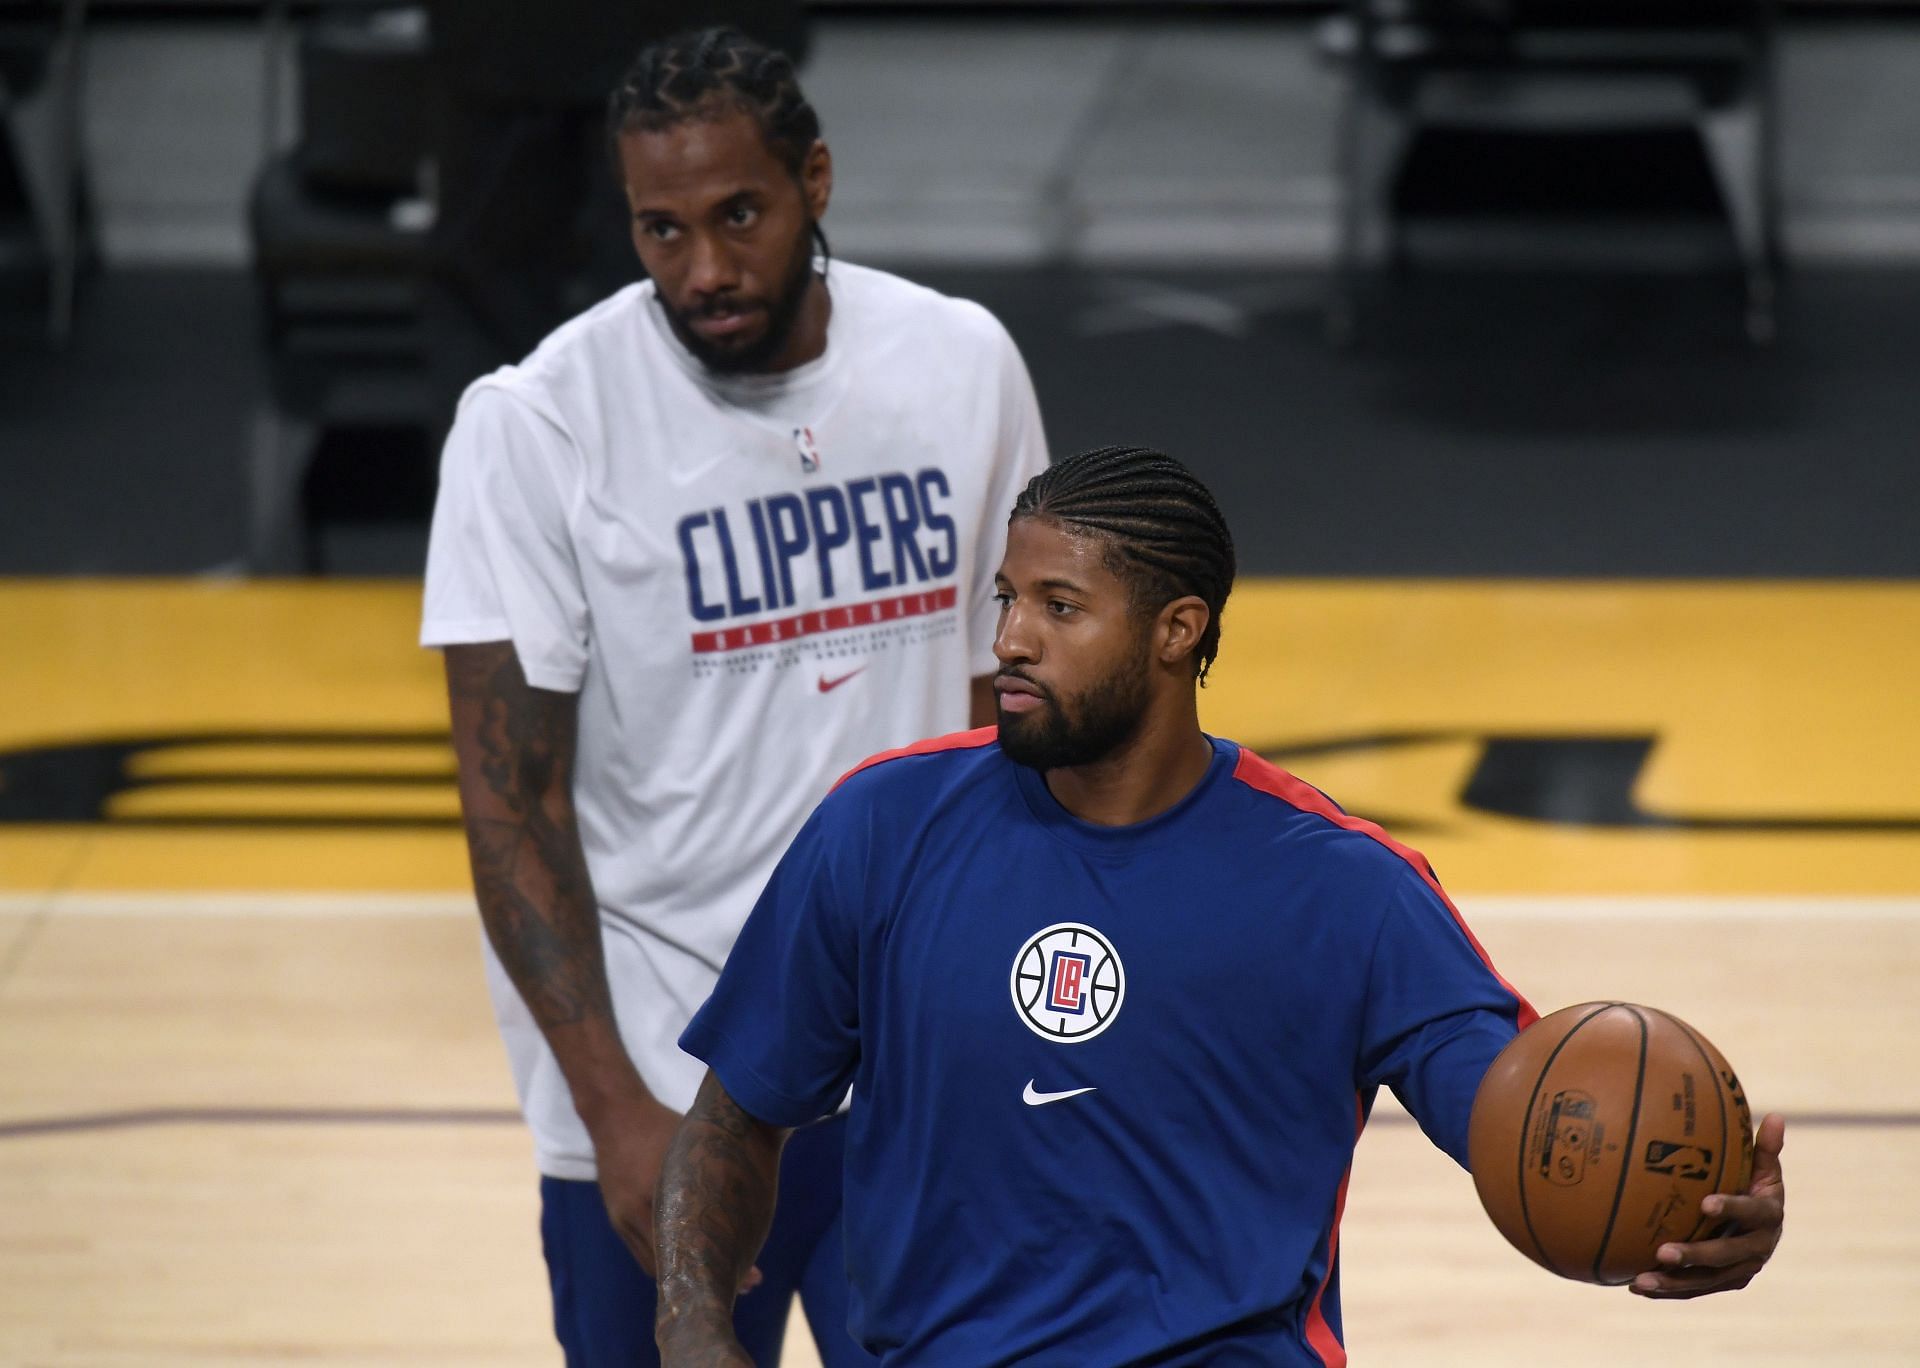 The LA Clippers will take on the OKC Thunder, without Kawhi Leonard